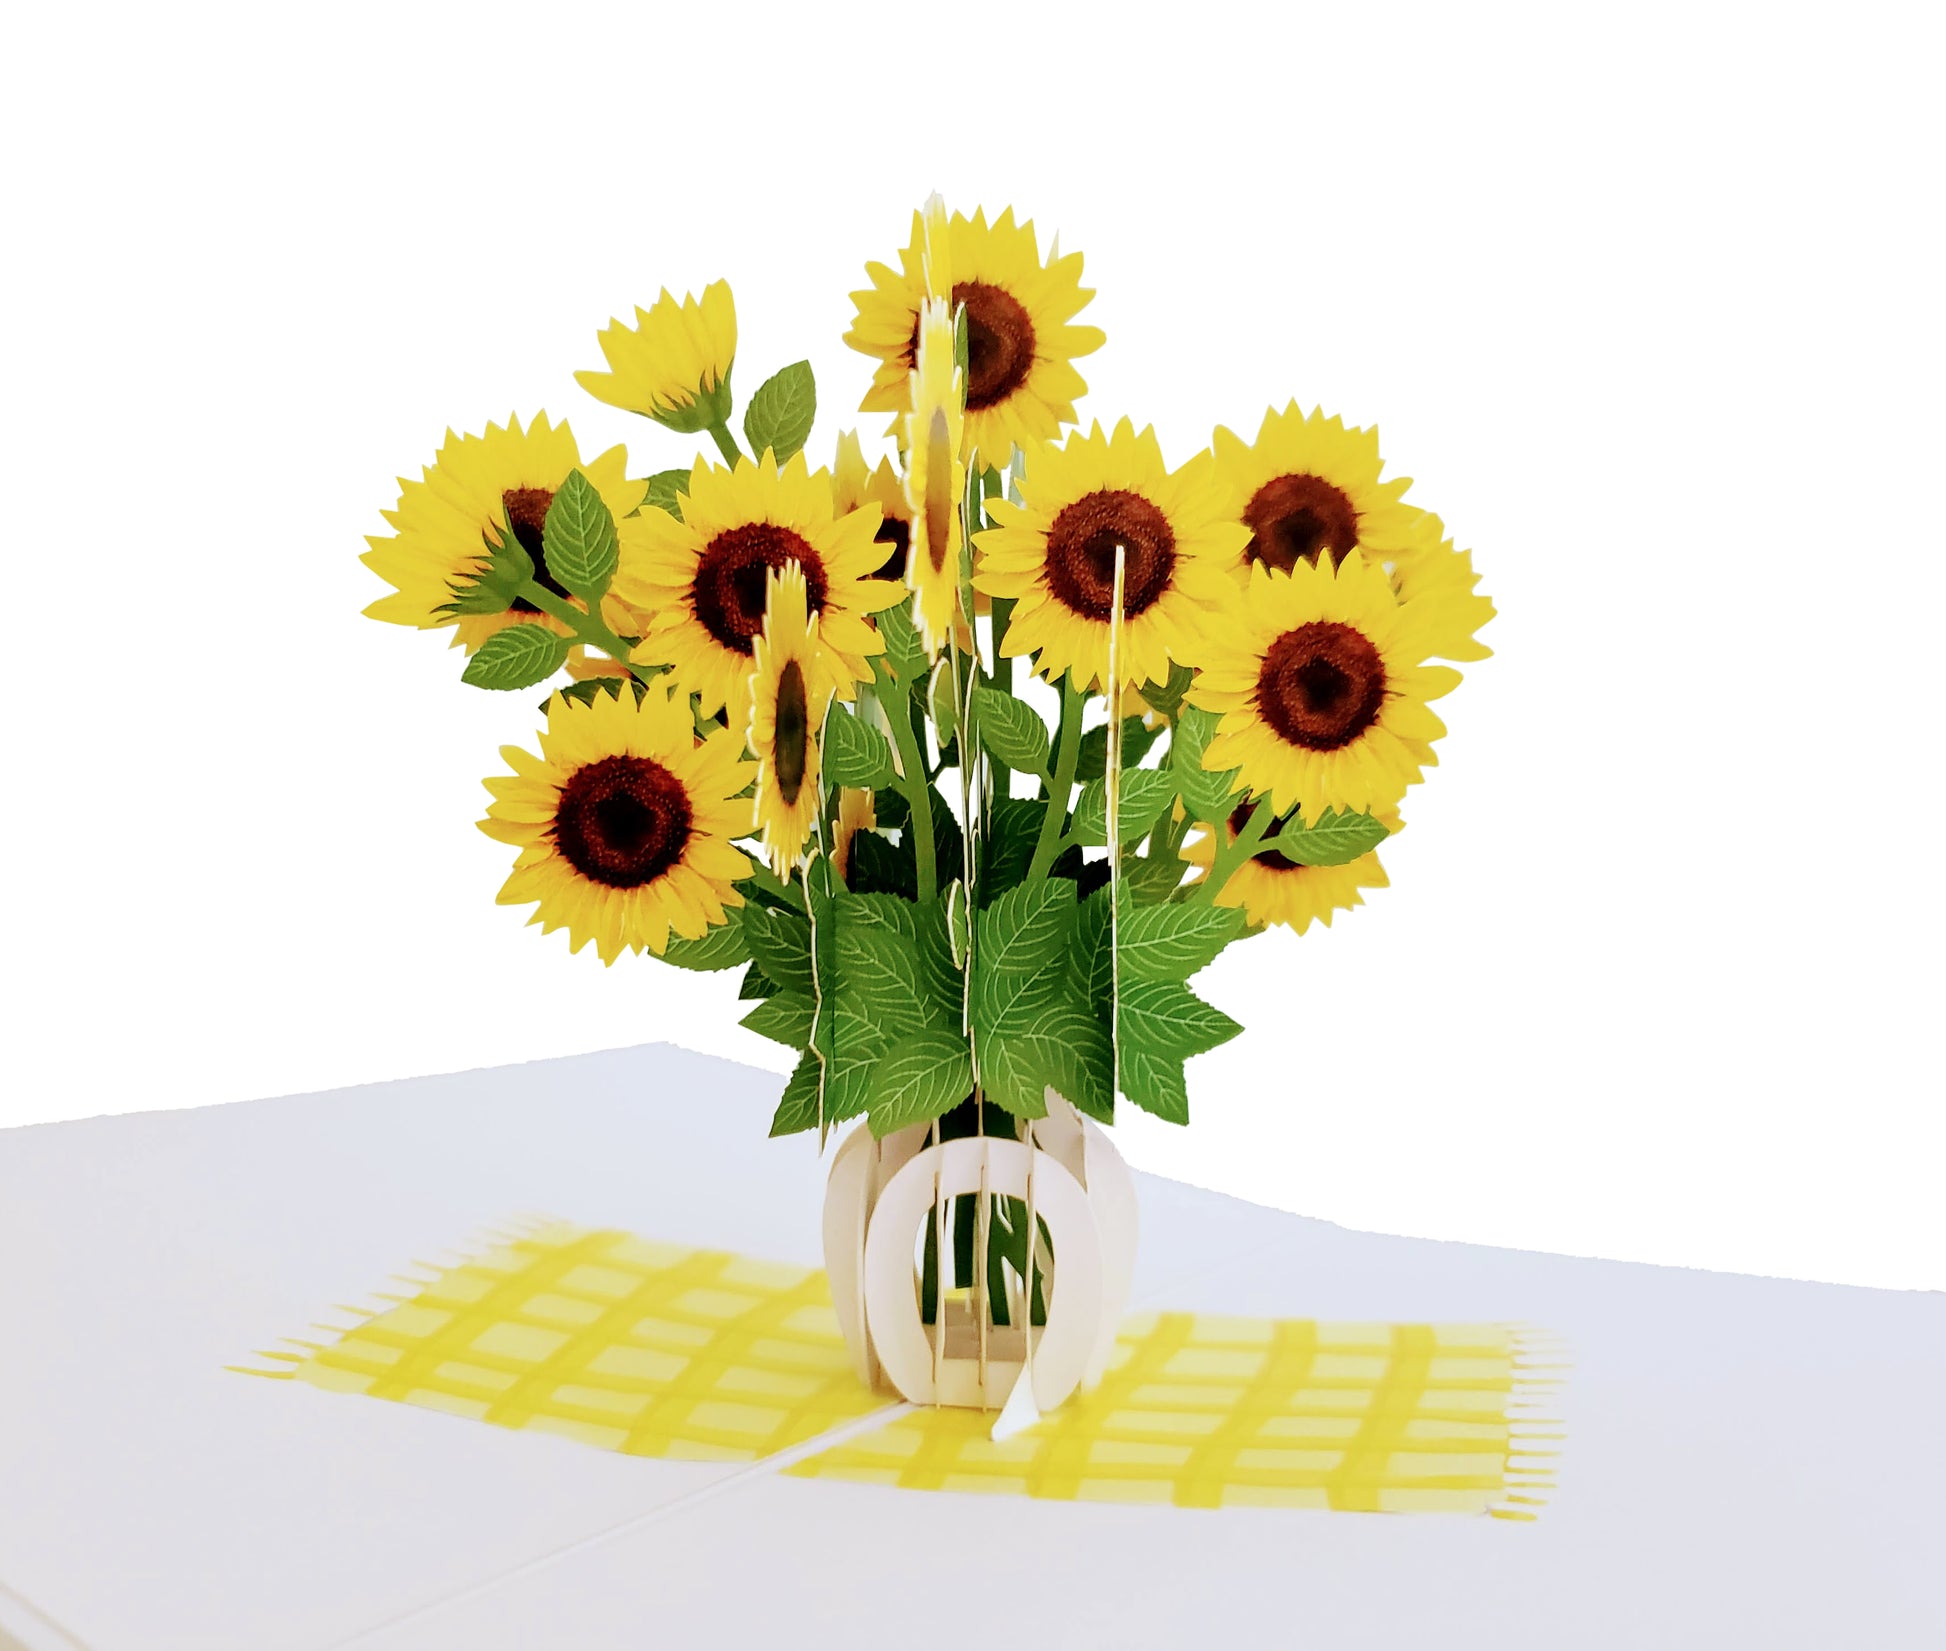 Cute Sunflowers 3D Pop Up Greeting Card - Admin Assistant Day - Anniversary - Birthday - Fun - Gradu - iGifts And Cards